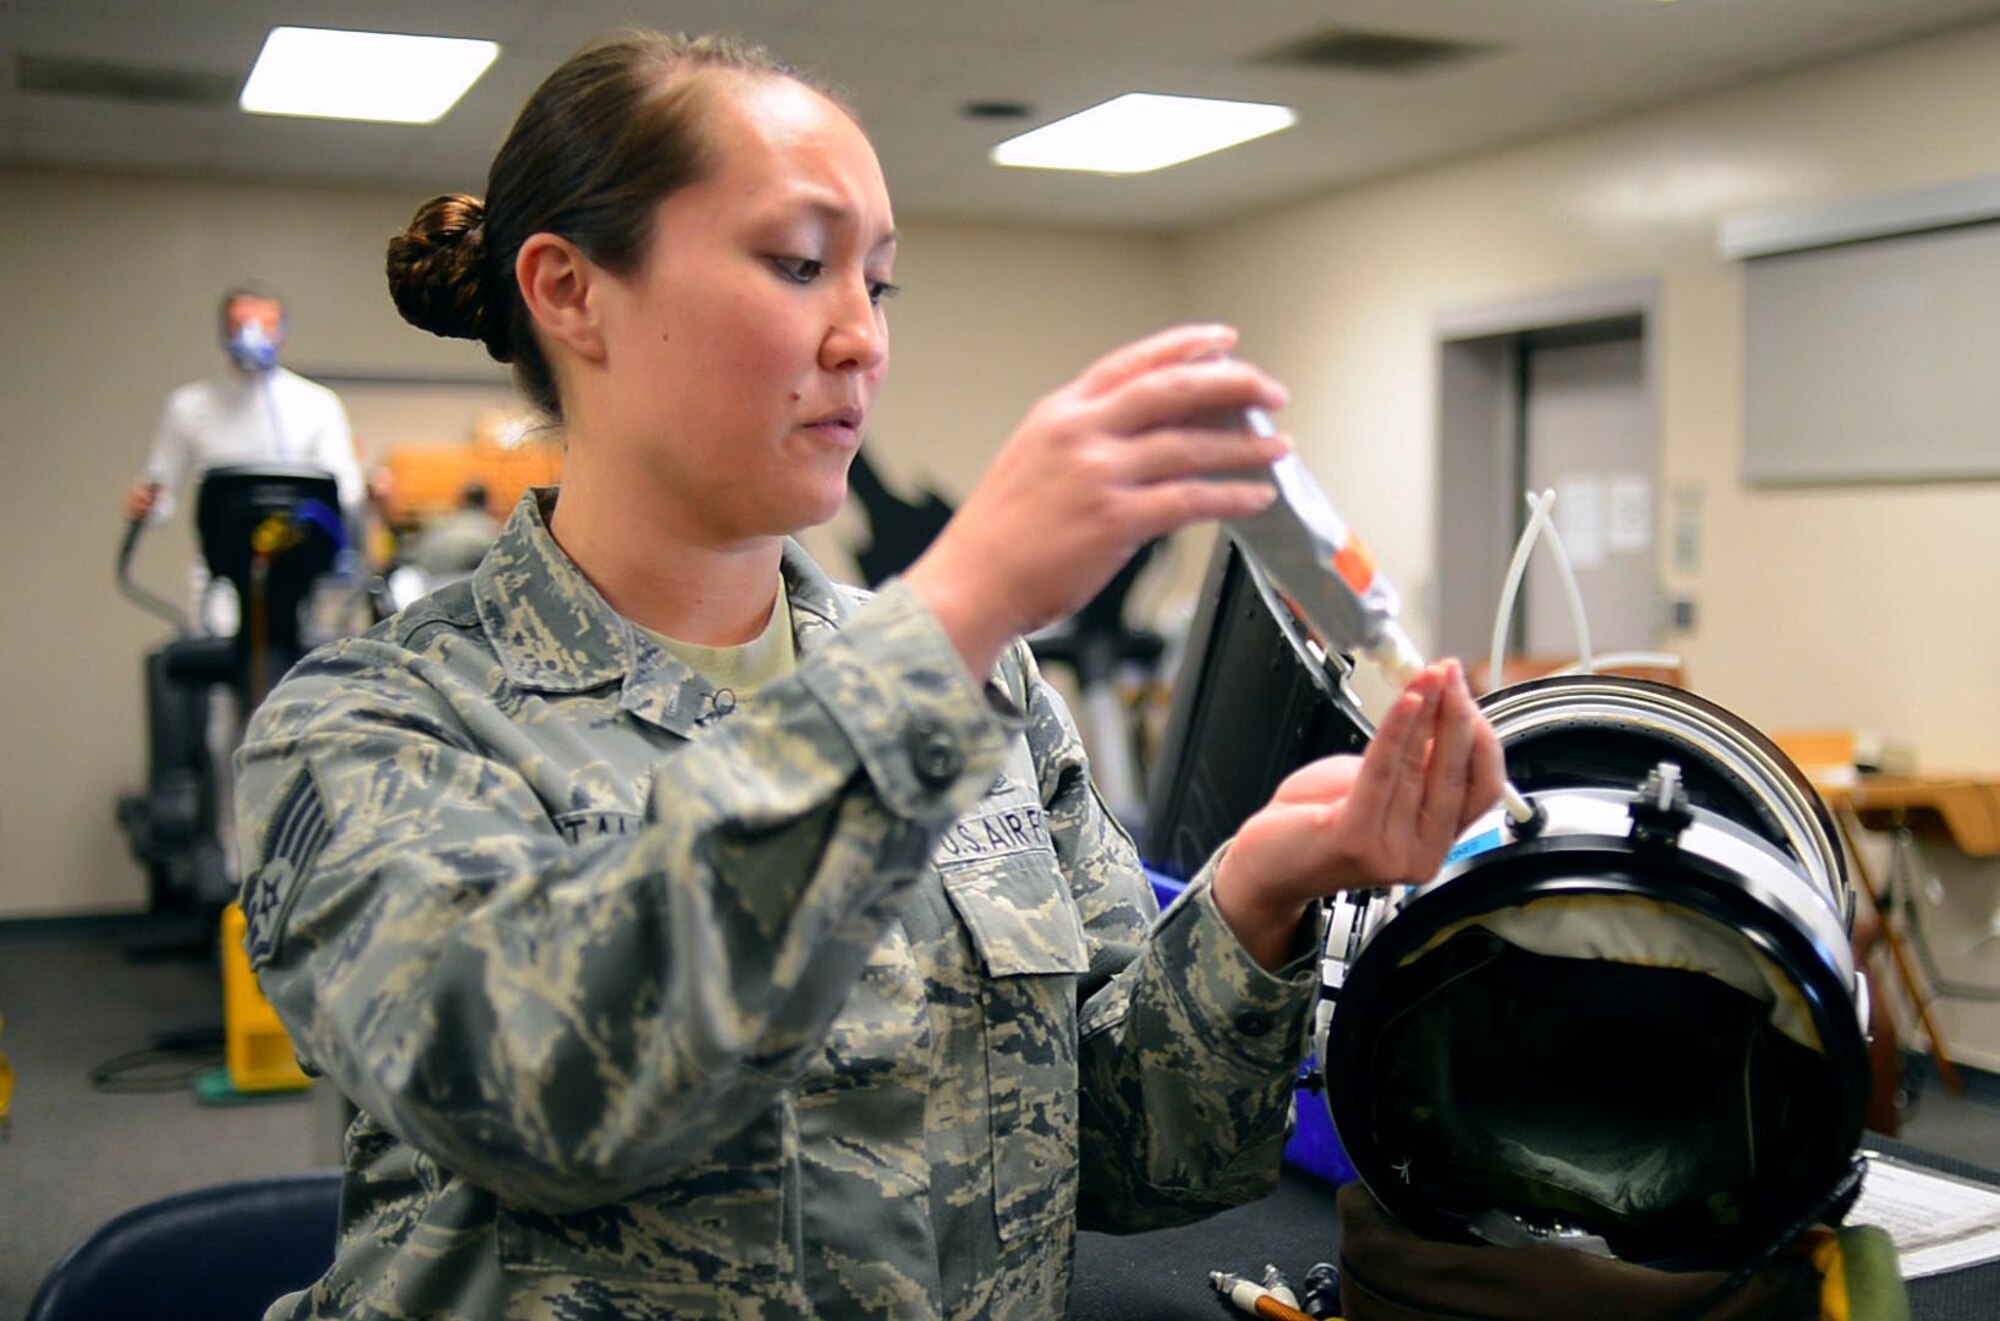 Staff Sgt. Suzzett Stalesky, 9th Physiological Support Squadron launch and recovery technician, demonstrates the use of tube food by inserting it into the feeding port of a U-2 full pressure suit helmet at Beale Air Force Base, Calif., Feb. 5, 2013. The U-2 is the only aircraft in the Department of Defense inventory that requires the utilization of a full pressure suit. (U.S. Air Force photo by Airman 1st Class Drew Buchanan/Released)